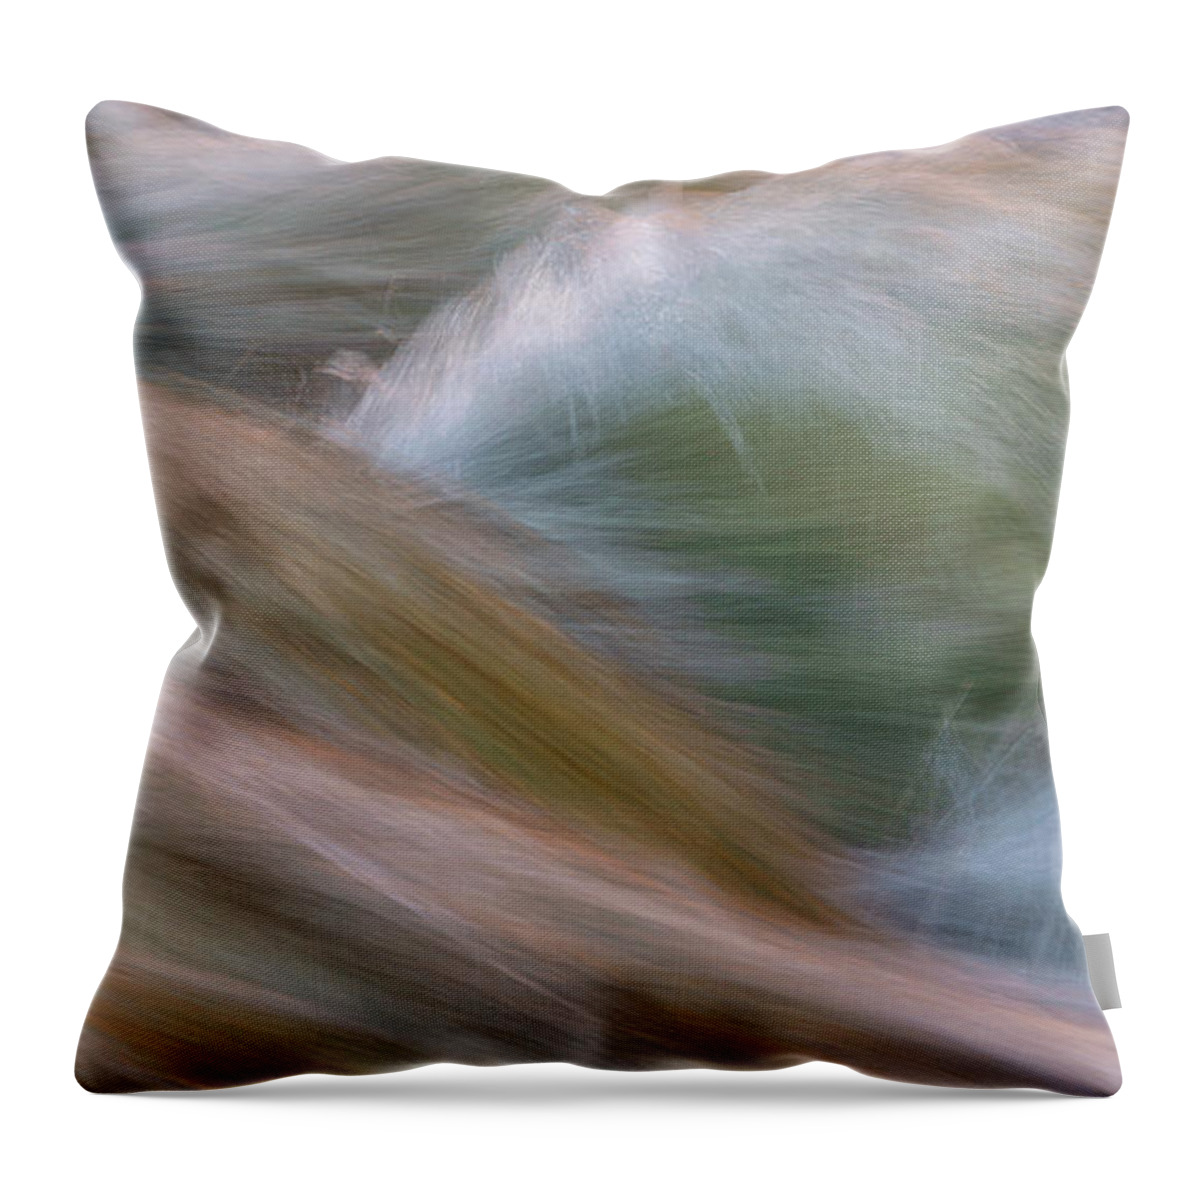 Water Throw Pillow featuring the photograph Rip Curl by Darren White